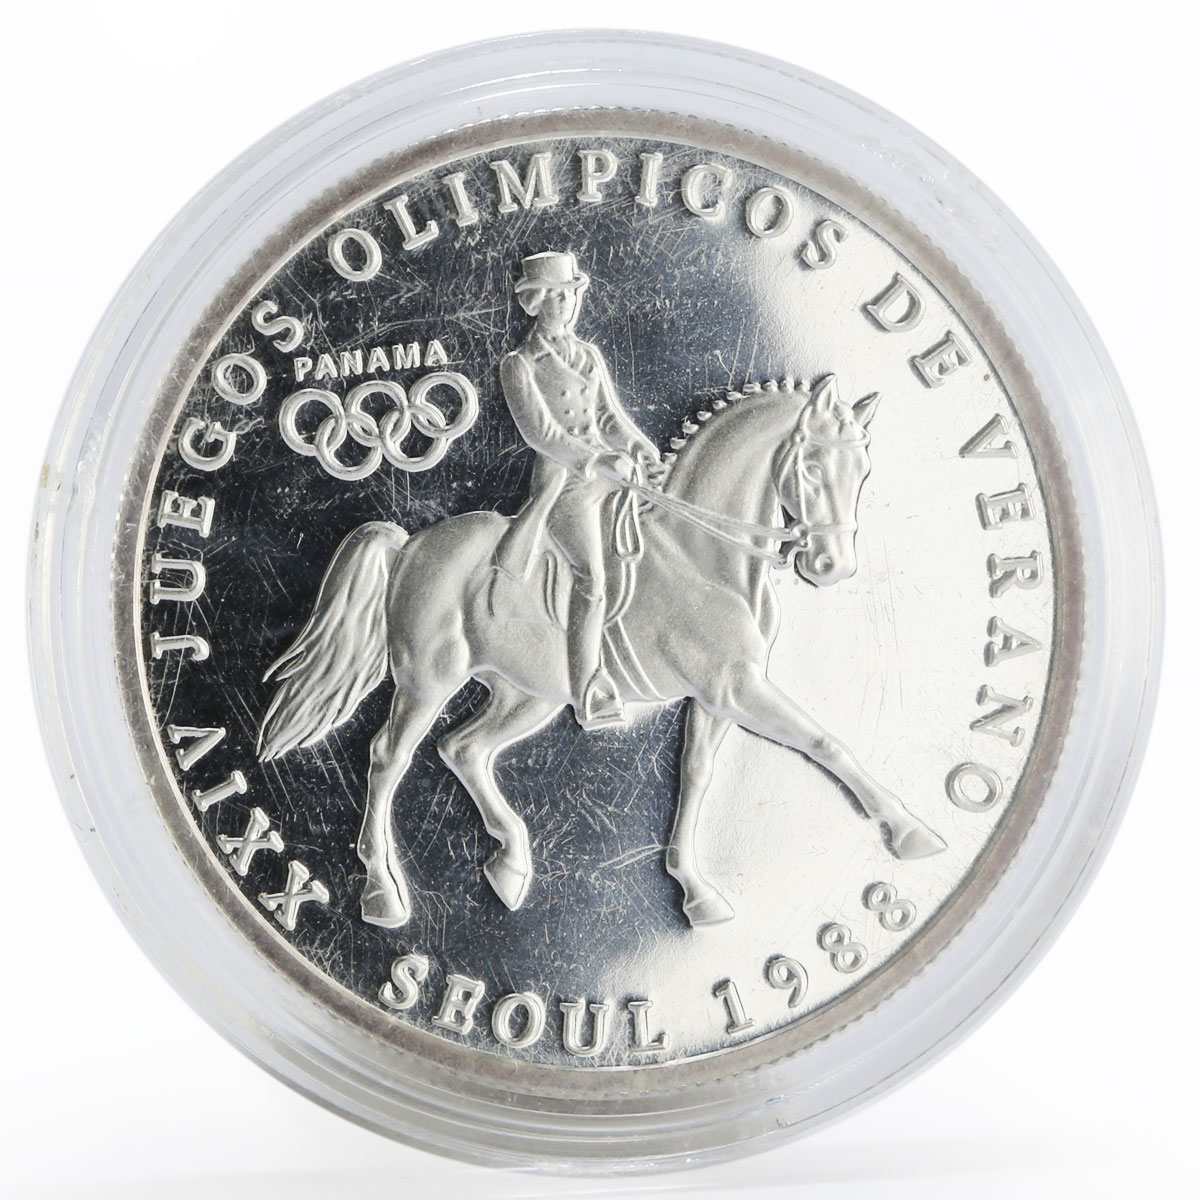 Panama 1 balboa Olympic Summer Games Equestrian proof silver coin 1988